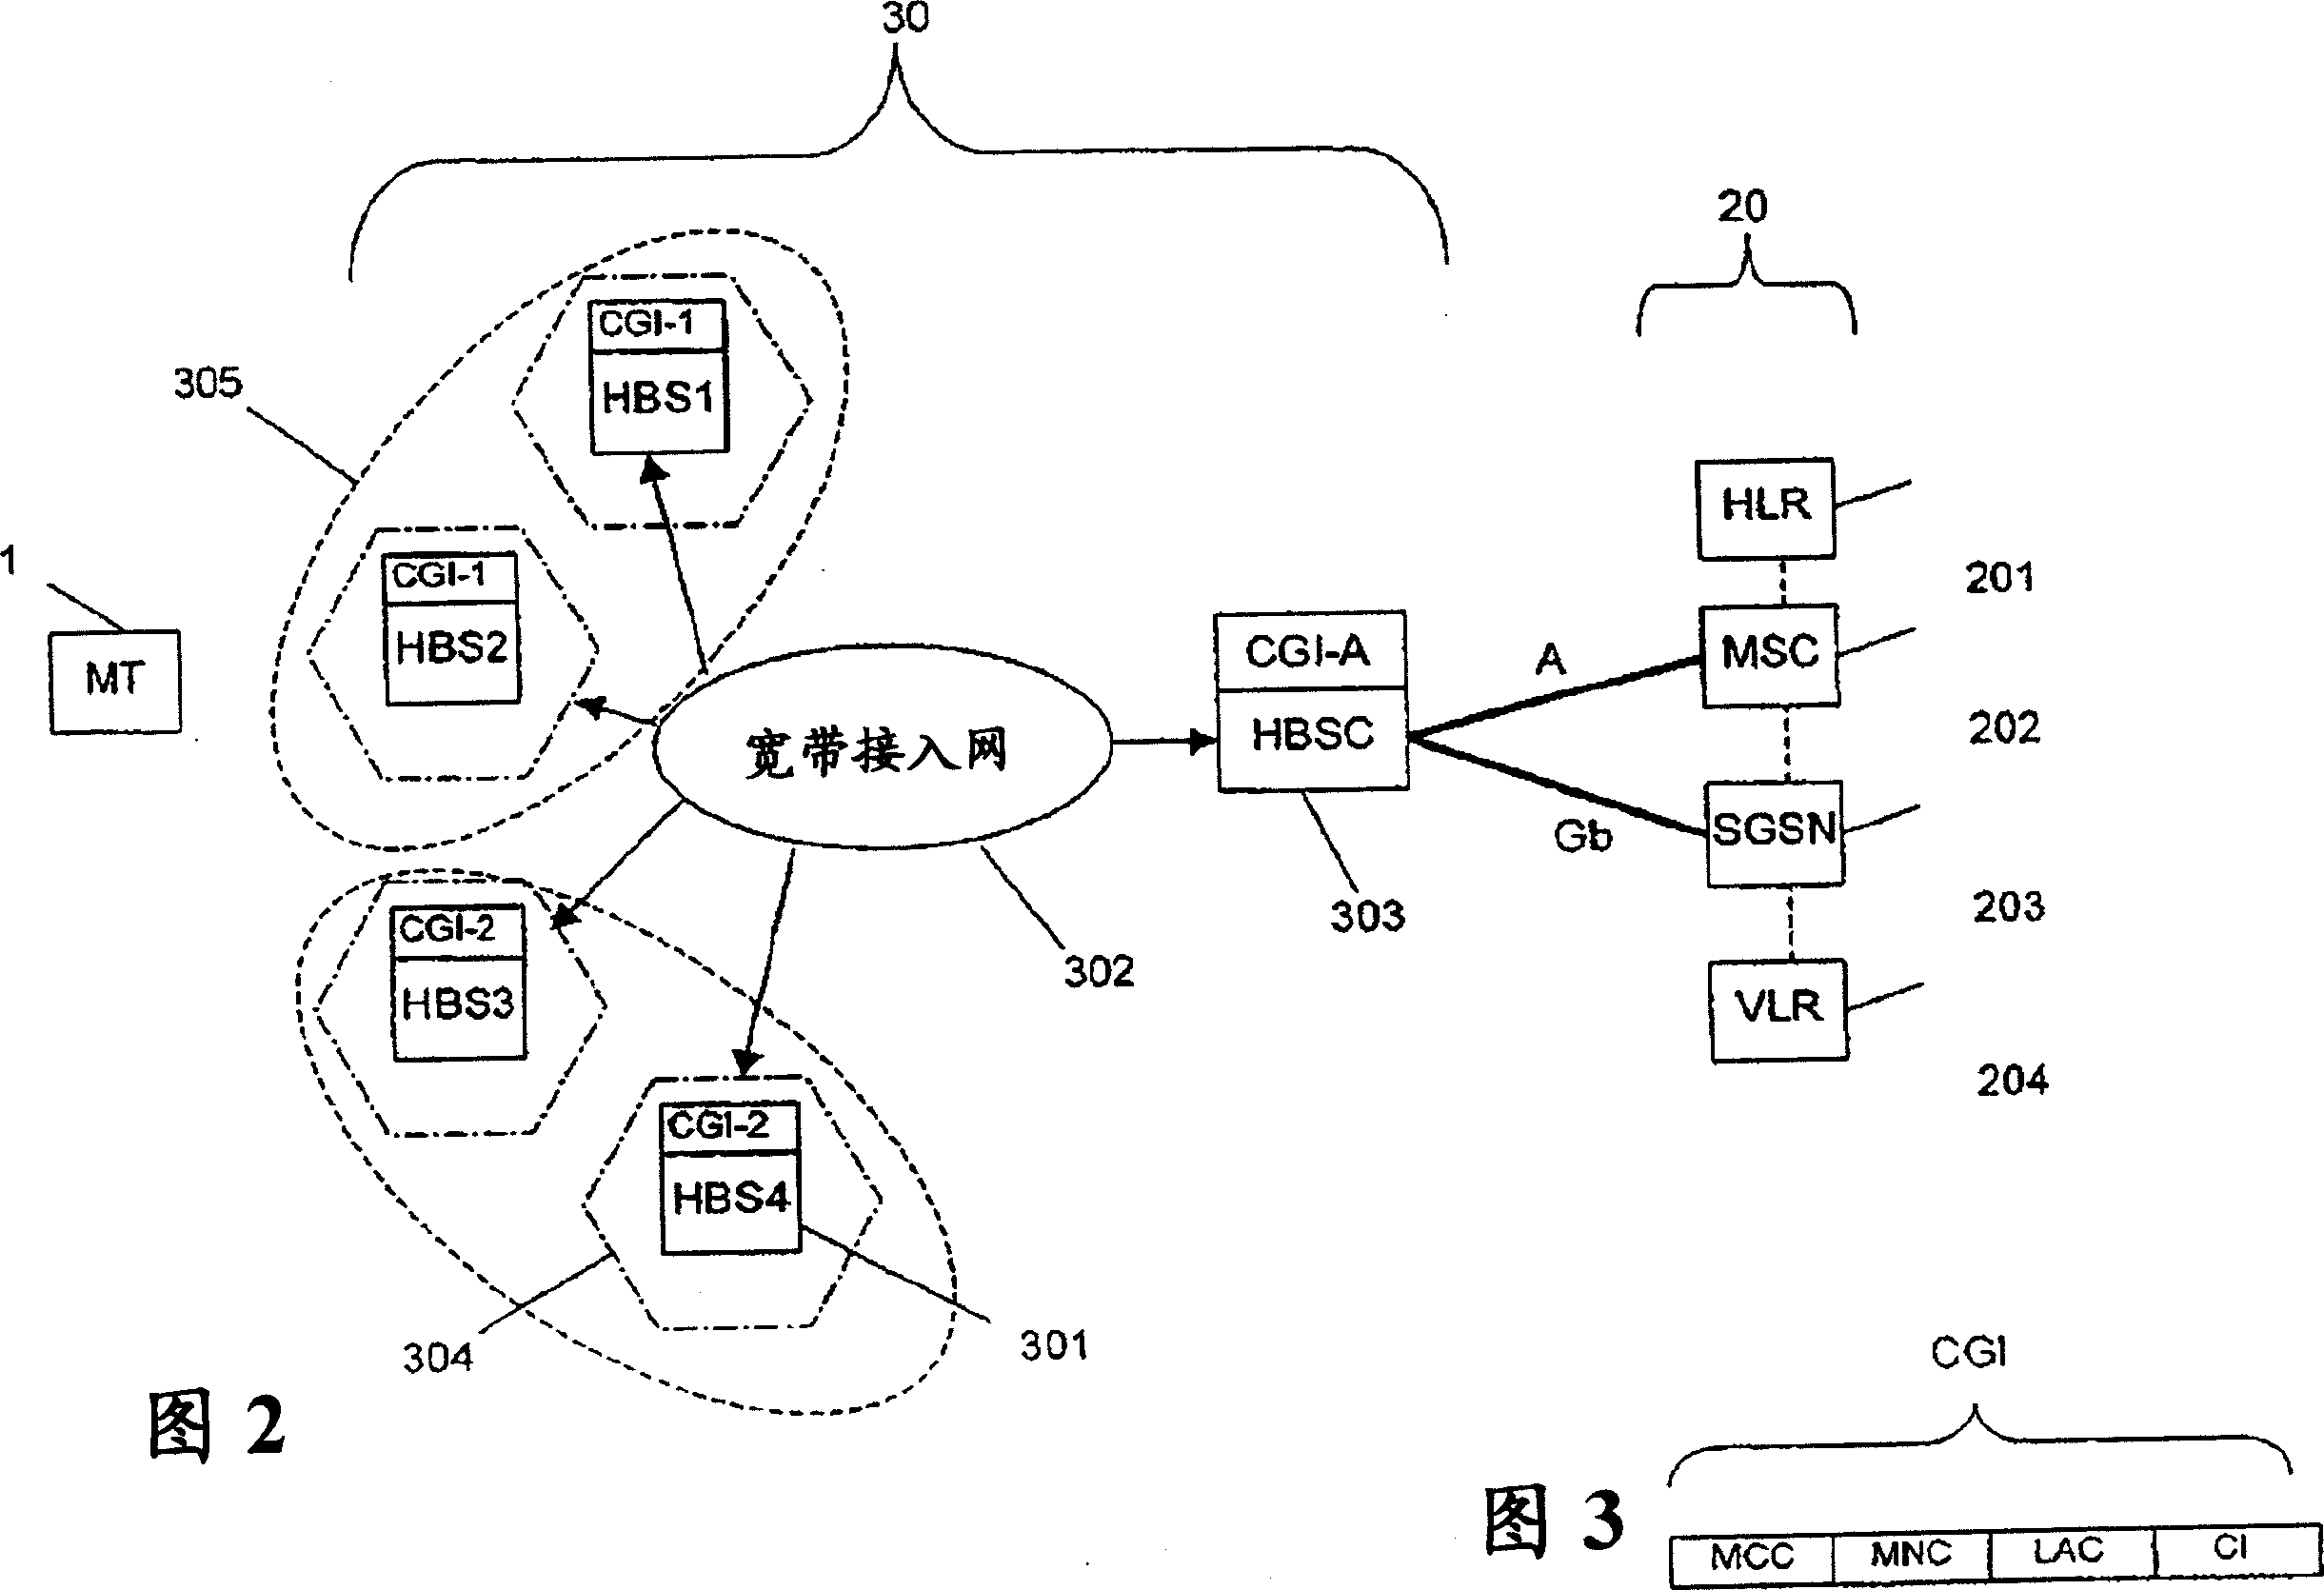 Mobiler cornmunications with unlicensed-radio access networks